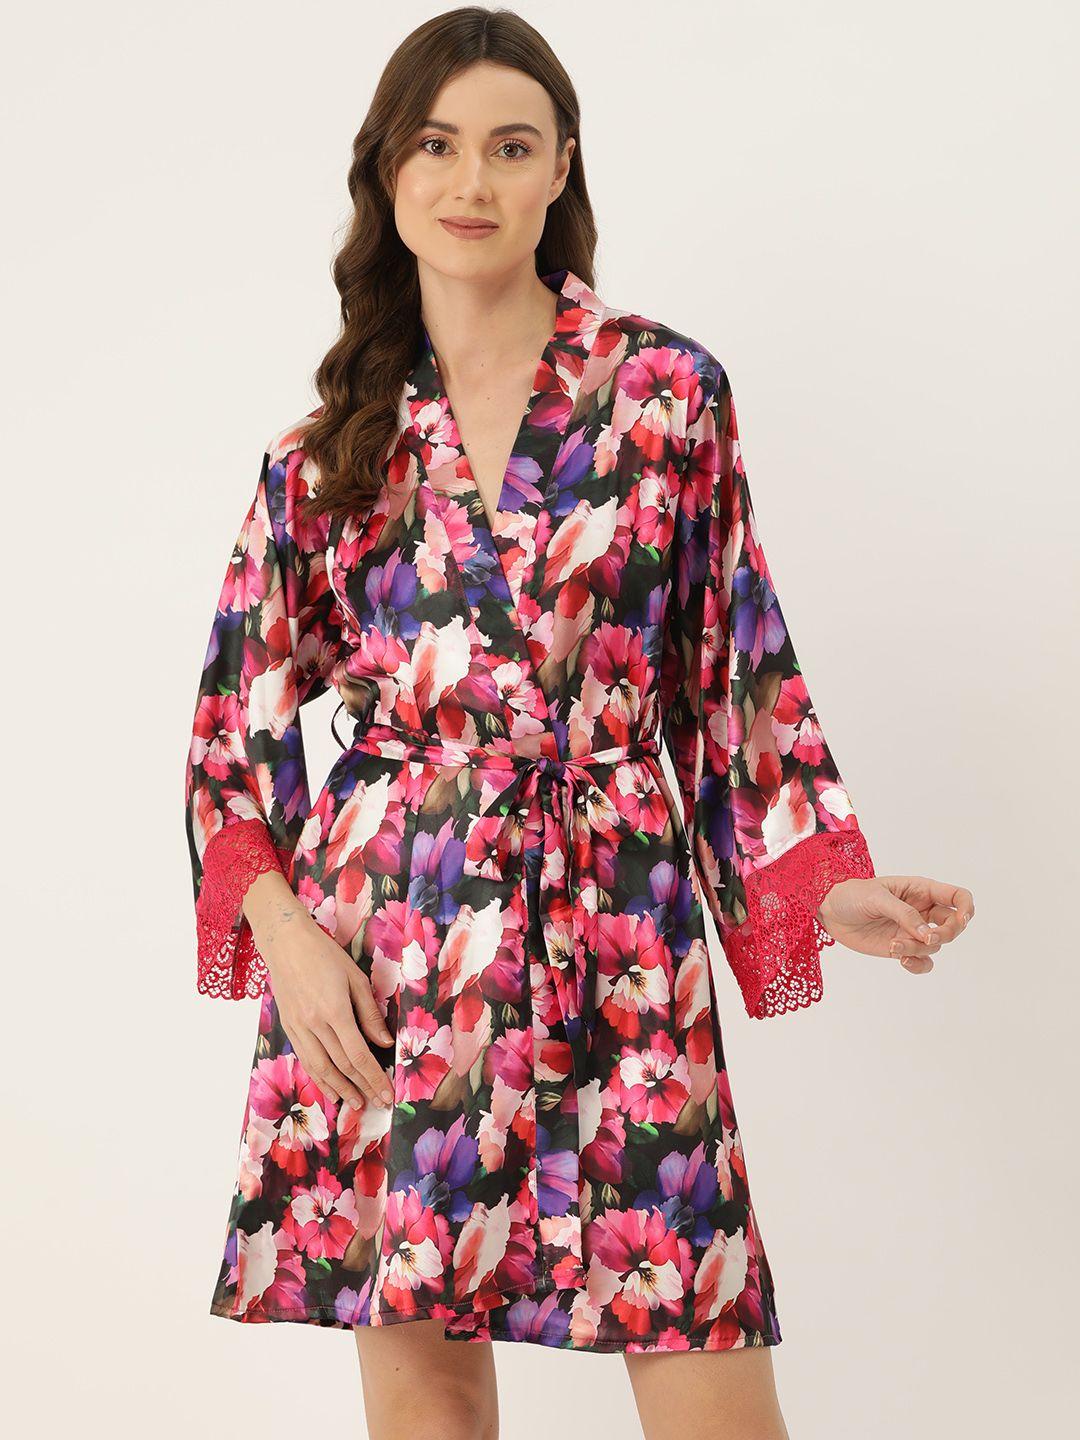 ms.lingies women printed satin robe with lace detail